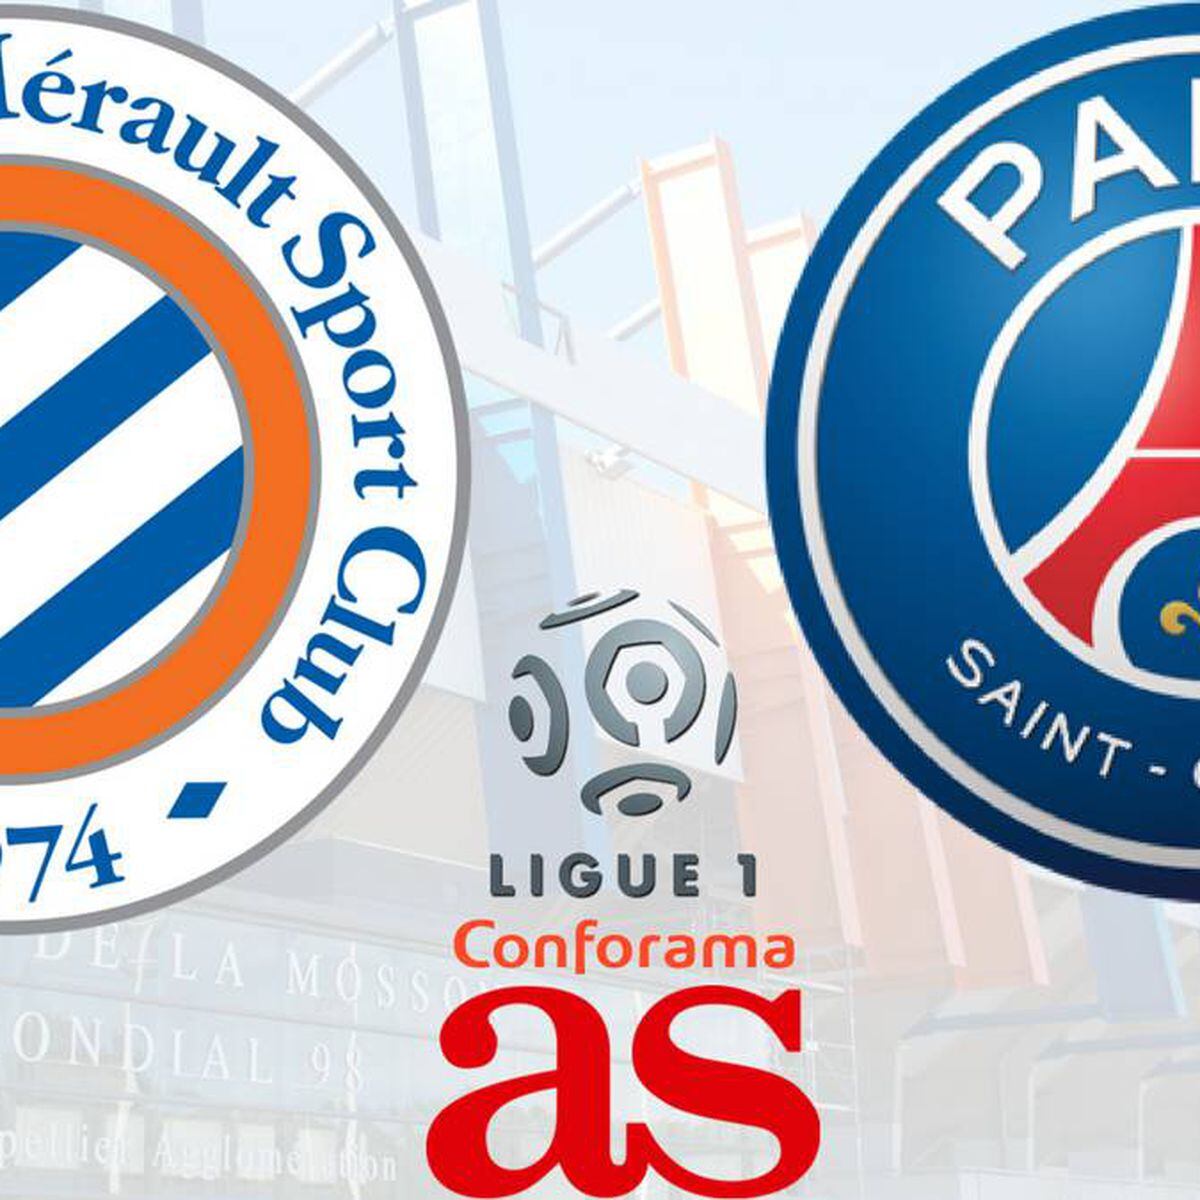 Montpellier-PSG, how and where to watch: times, TV, online - AS USA